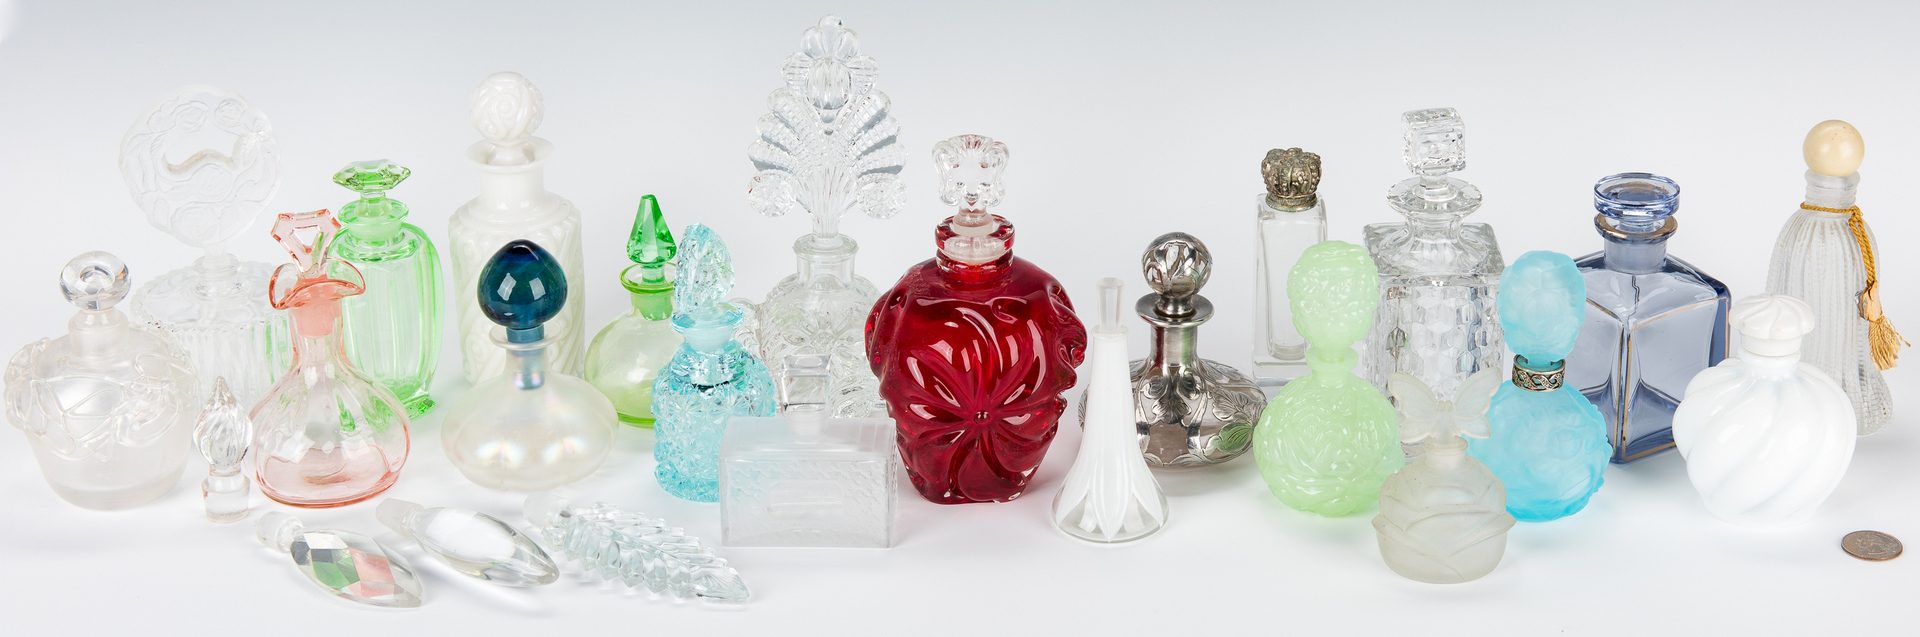 Lot 430: 25 Assorted Perfume Bottles & Stoppers